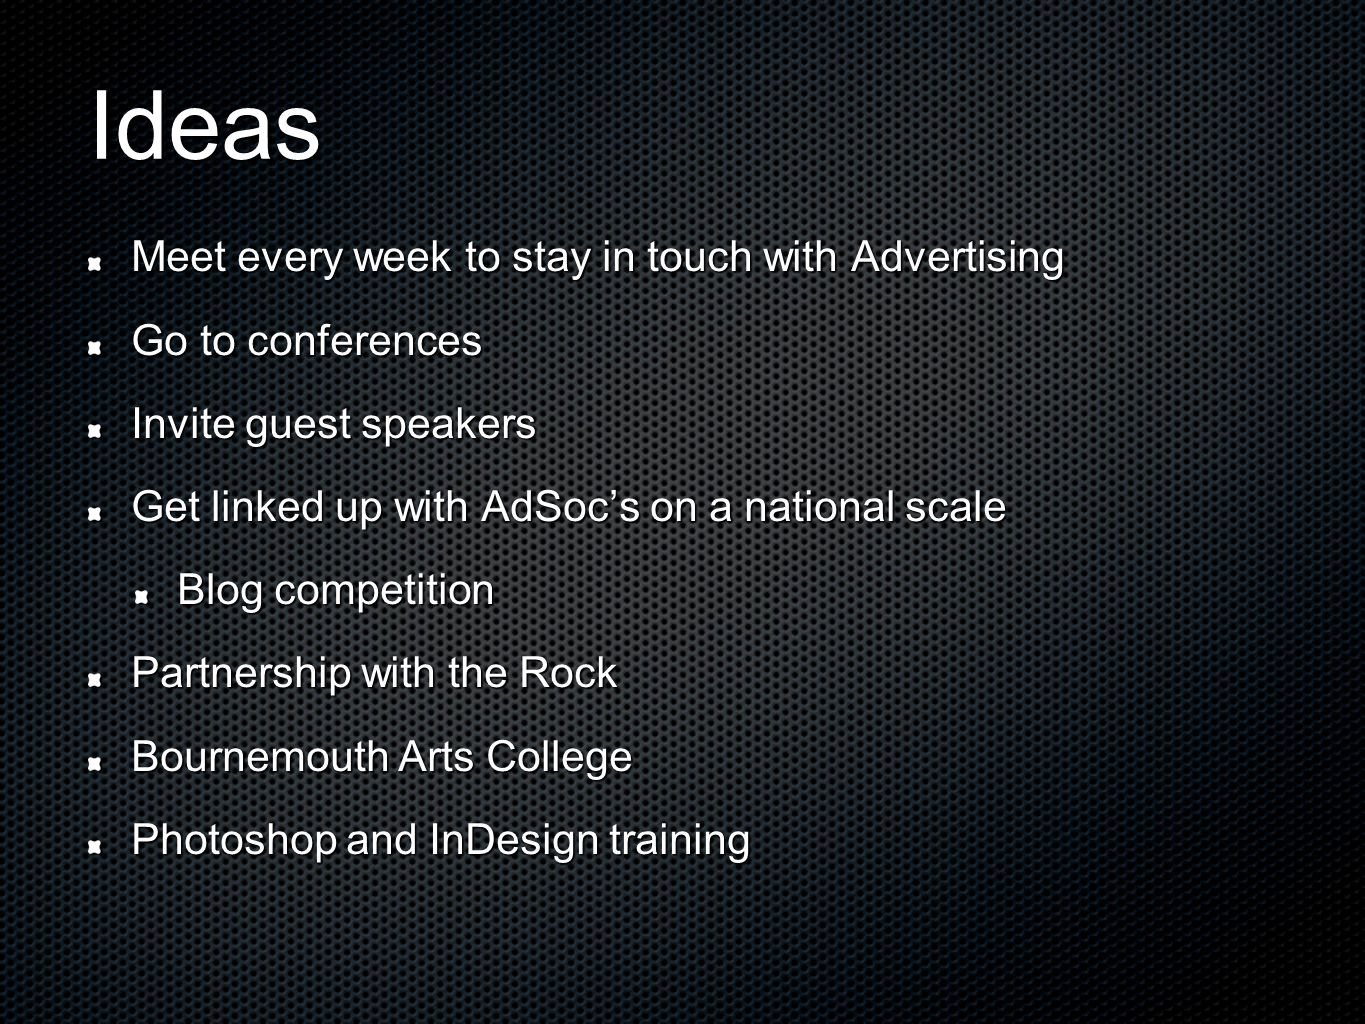 Ideas Meet every week to stay in touch with Advertising Go to conferences Invite guest speakers Get linked up with AdSoc’s on a national scale Blog competition Partnership with the Rock Bournemouth Arts College Photoshop and InDesign training